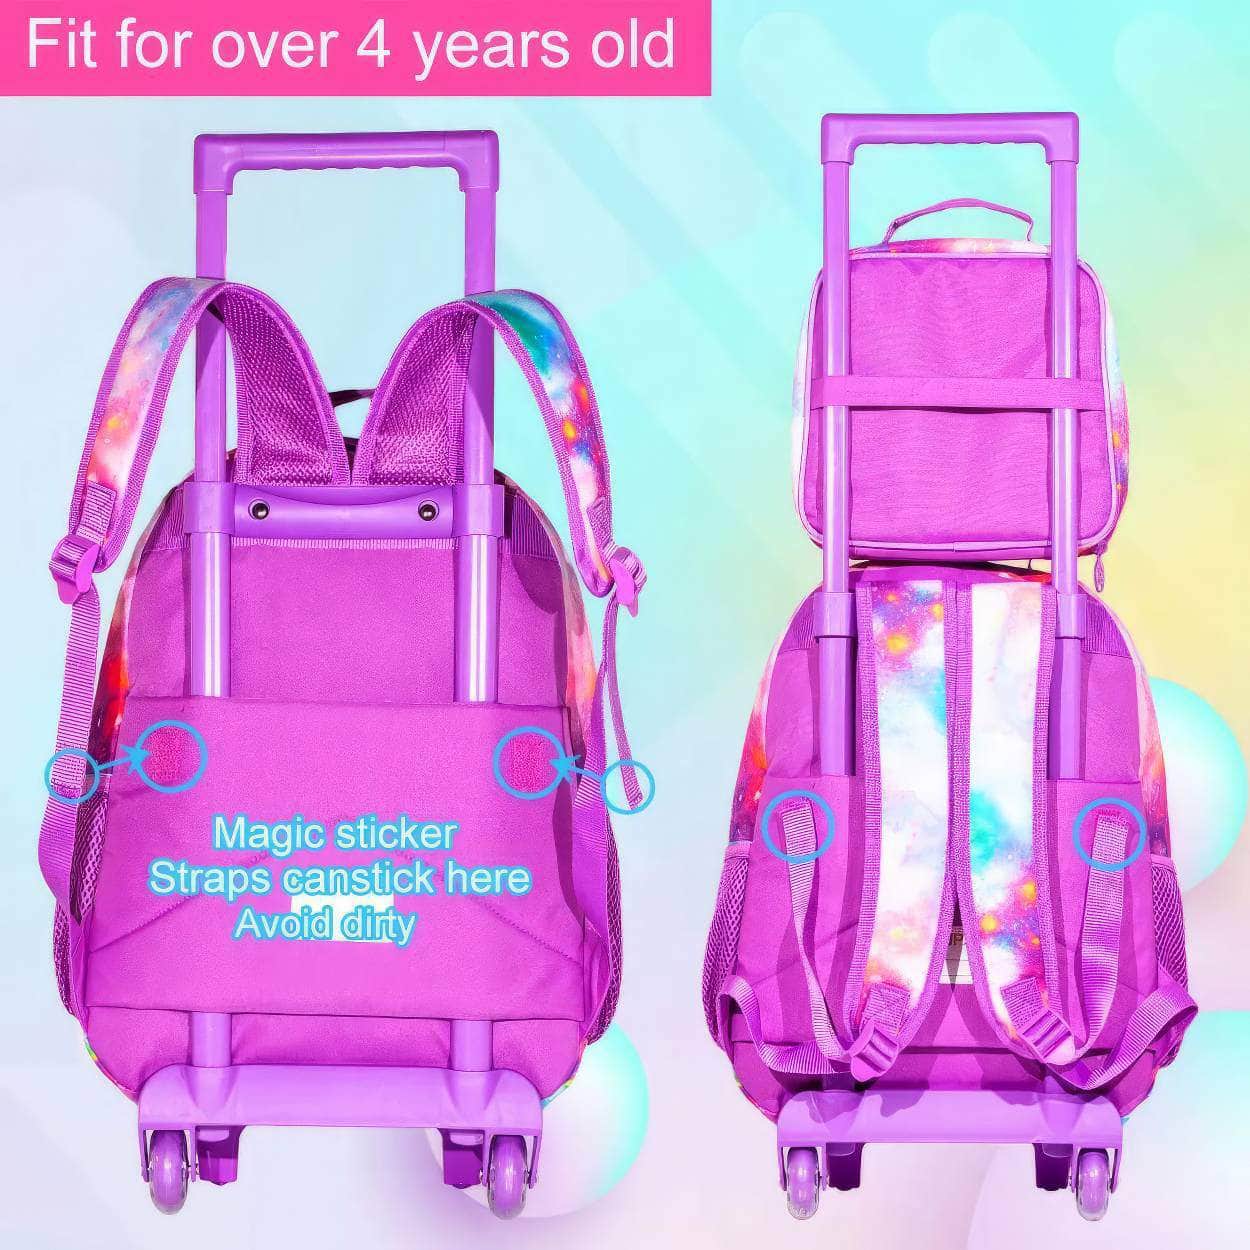 Girls' 3PCS Rolling Backpack Set - Sleeping Unicorn Design with Glow-in-the-dark Function, Roller Wheels, and Lunch Bag Purple